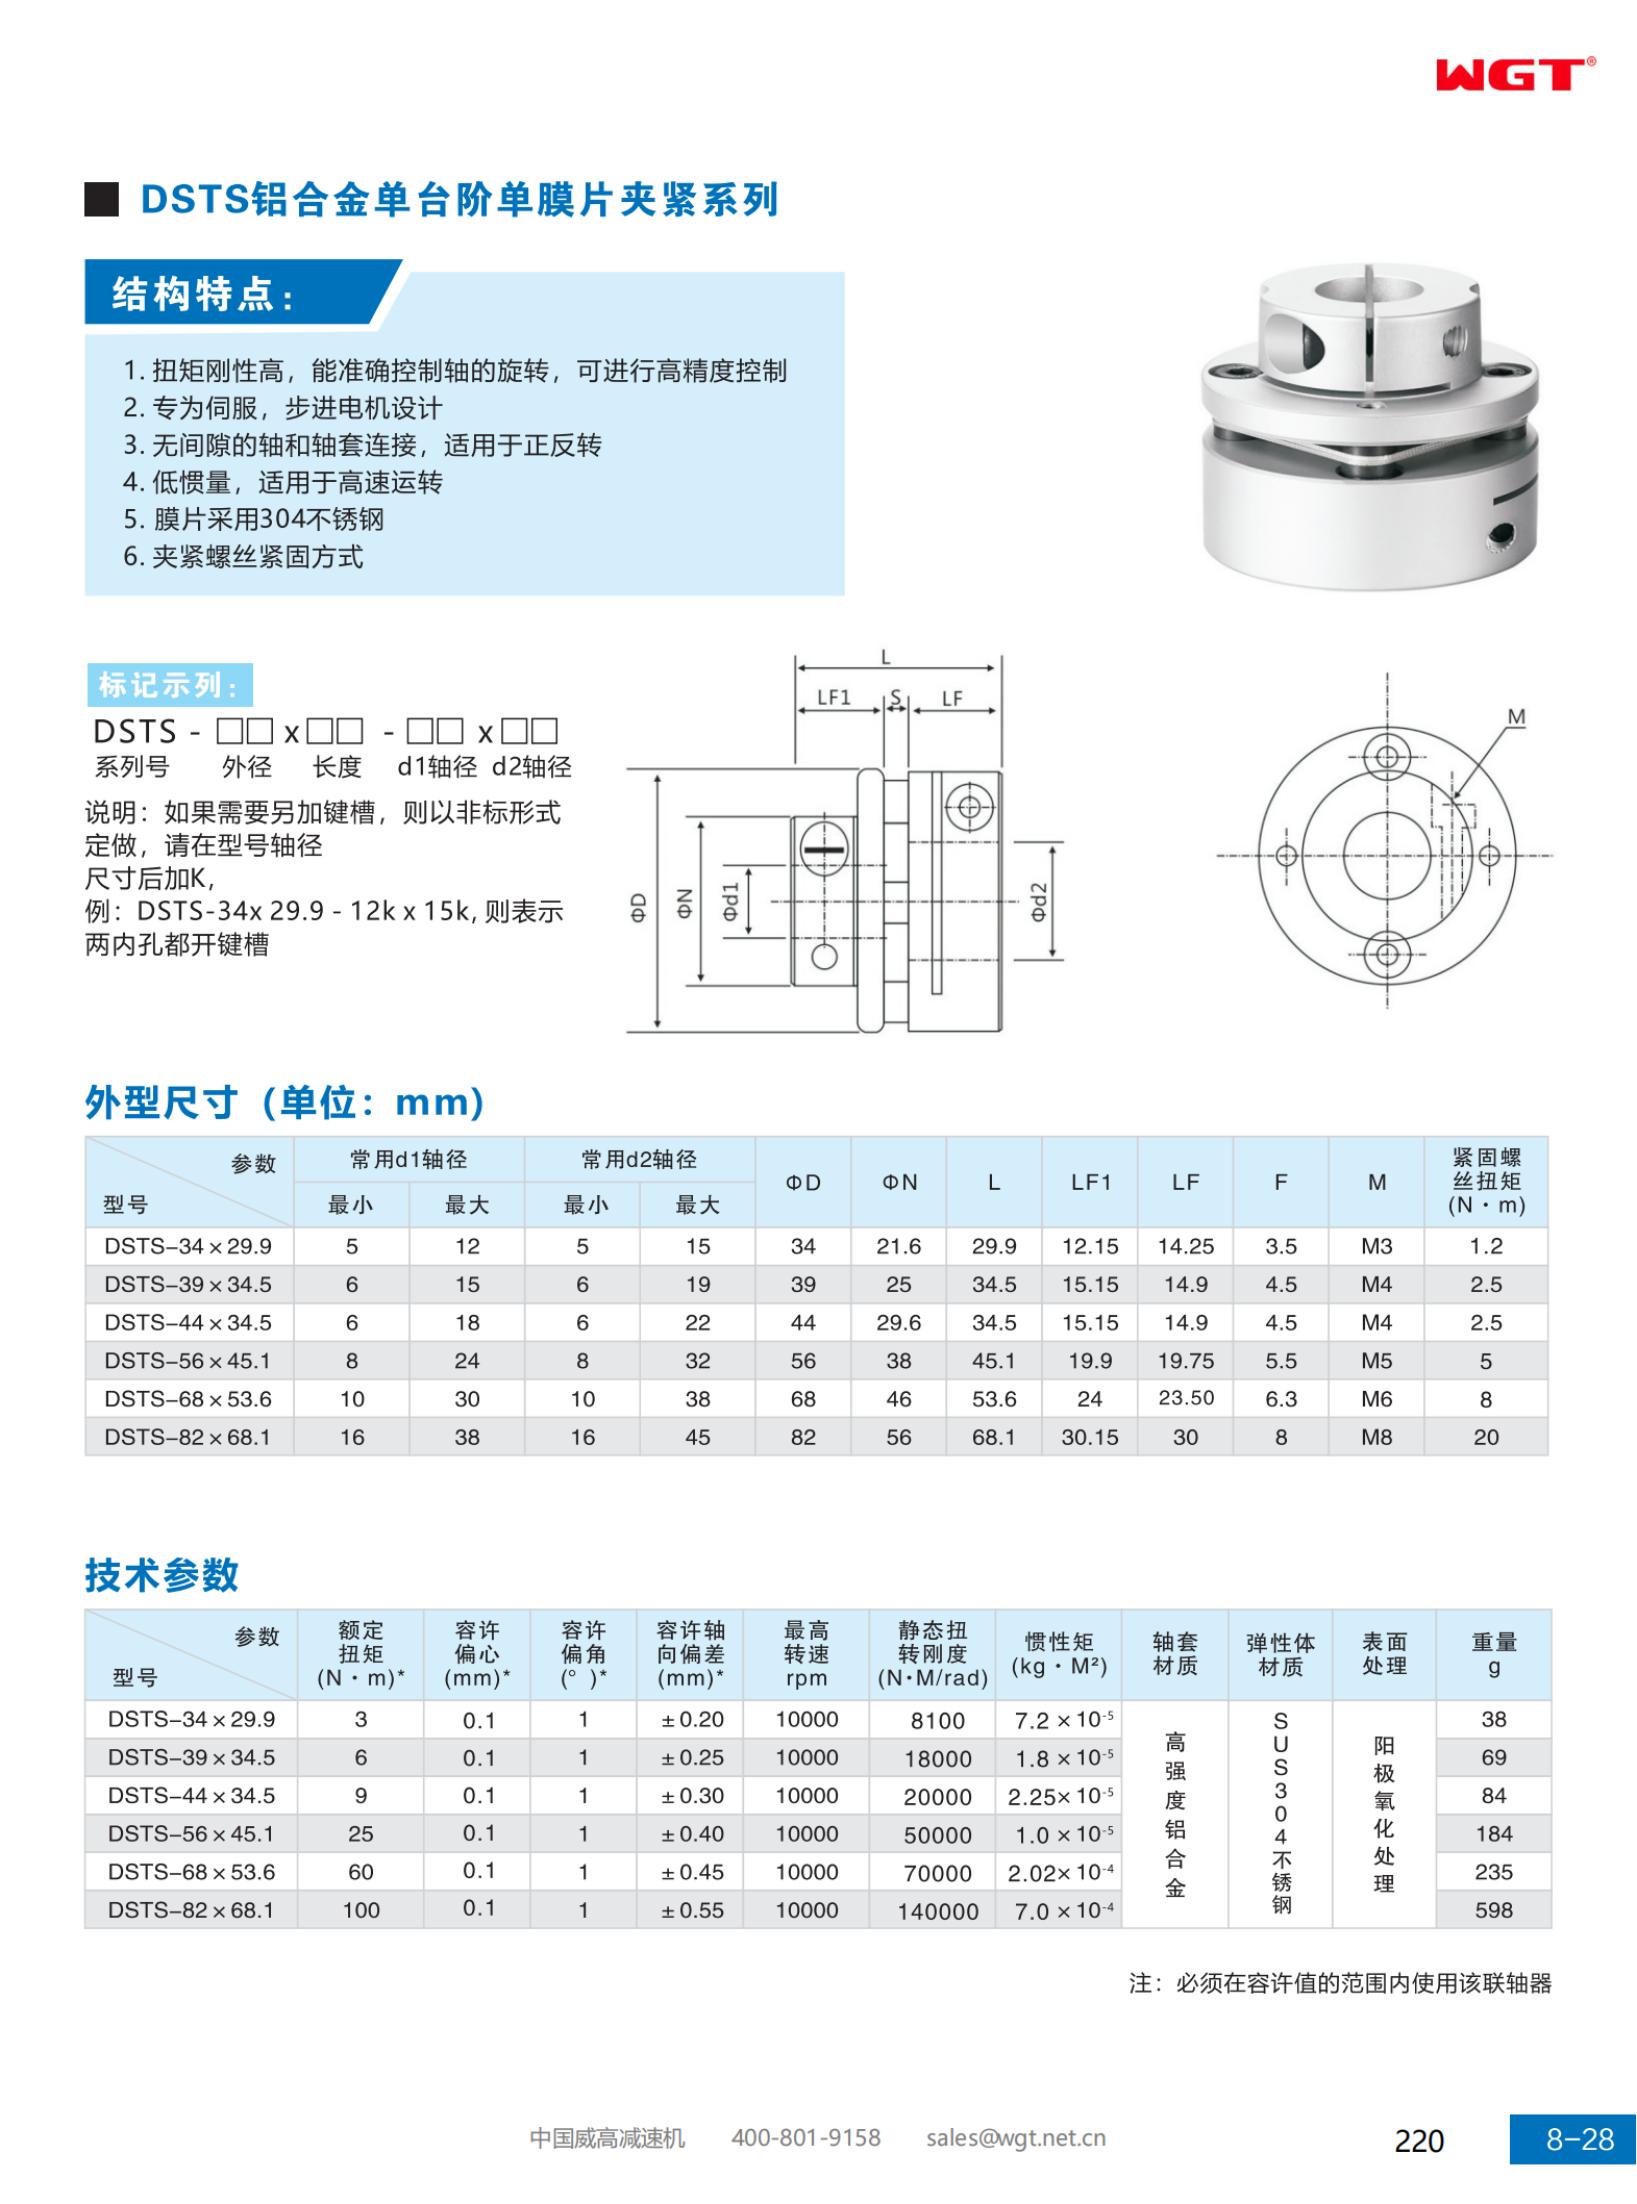 DSTS aluminum alloy single step single diaphragm clamping series